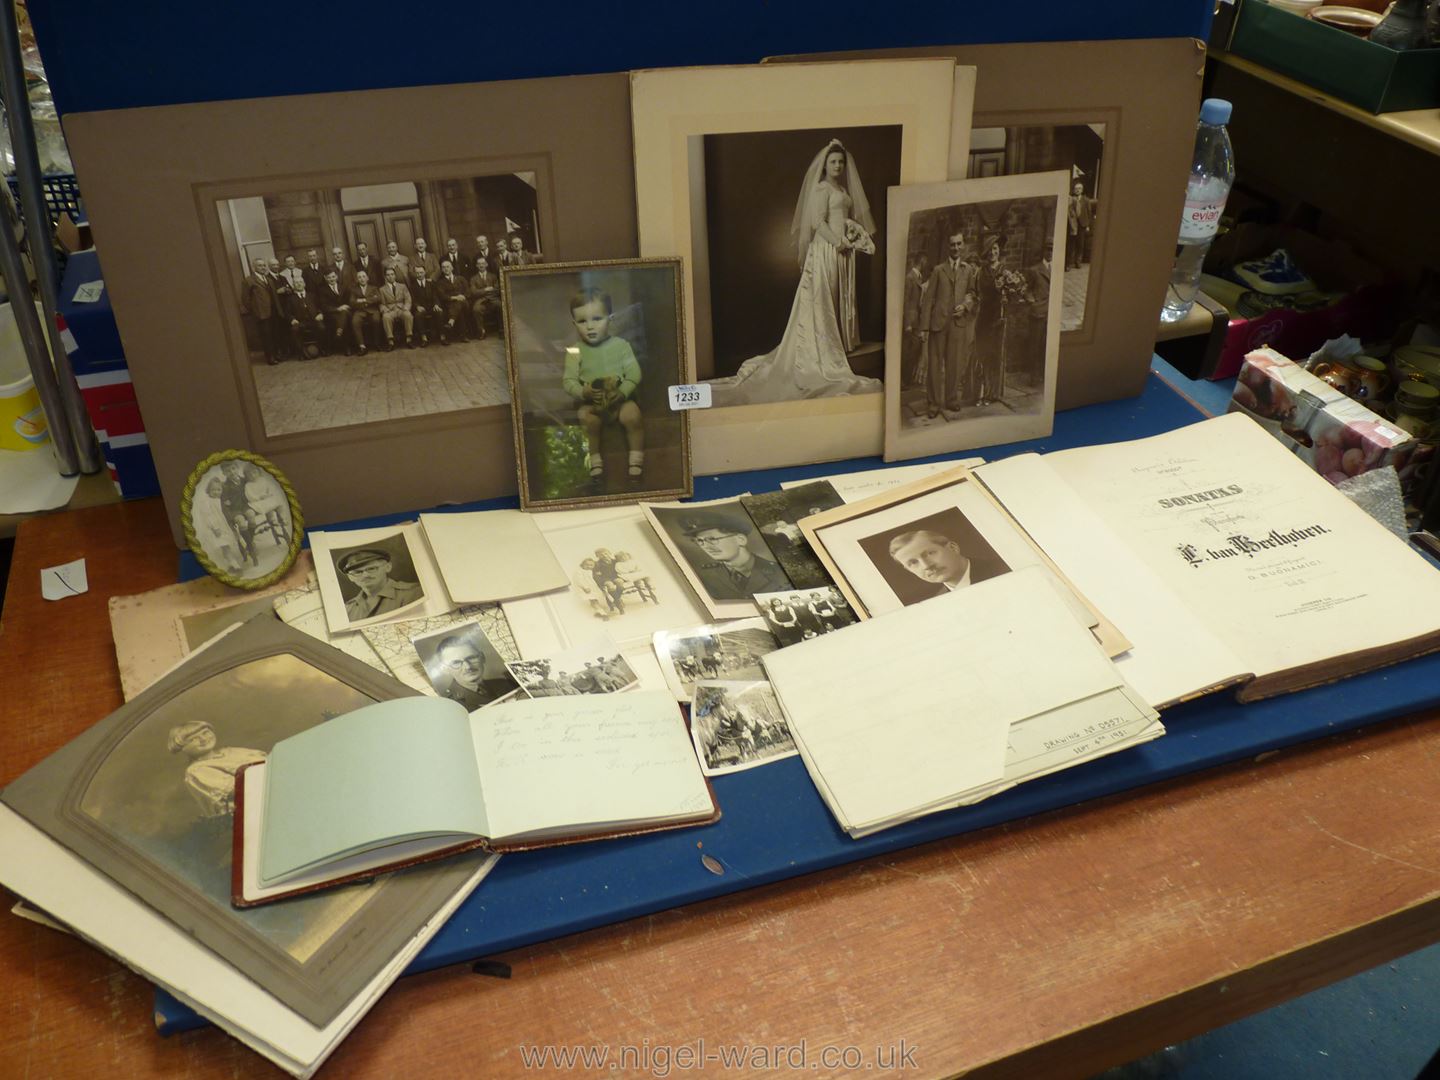 A quantity of black and white photographs and an autograph book.